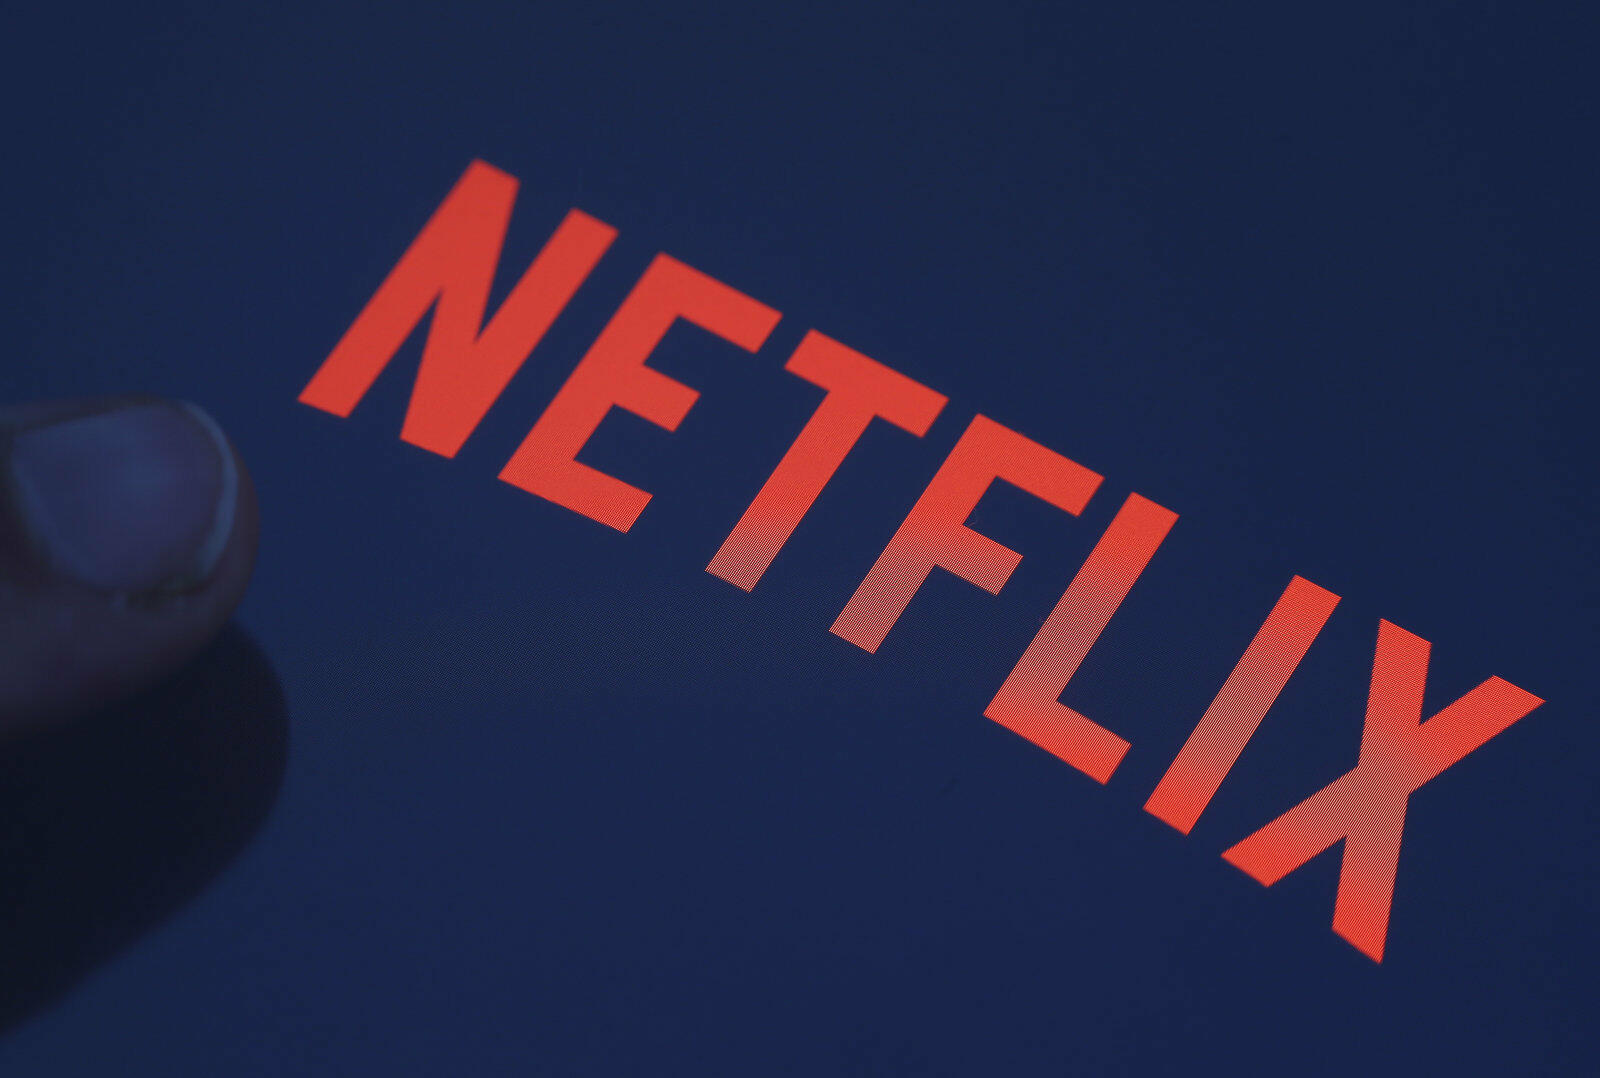 Everything Coming To Netflix in February 2020 - Thumbnail Image